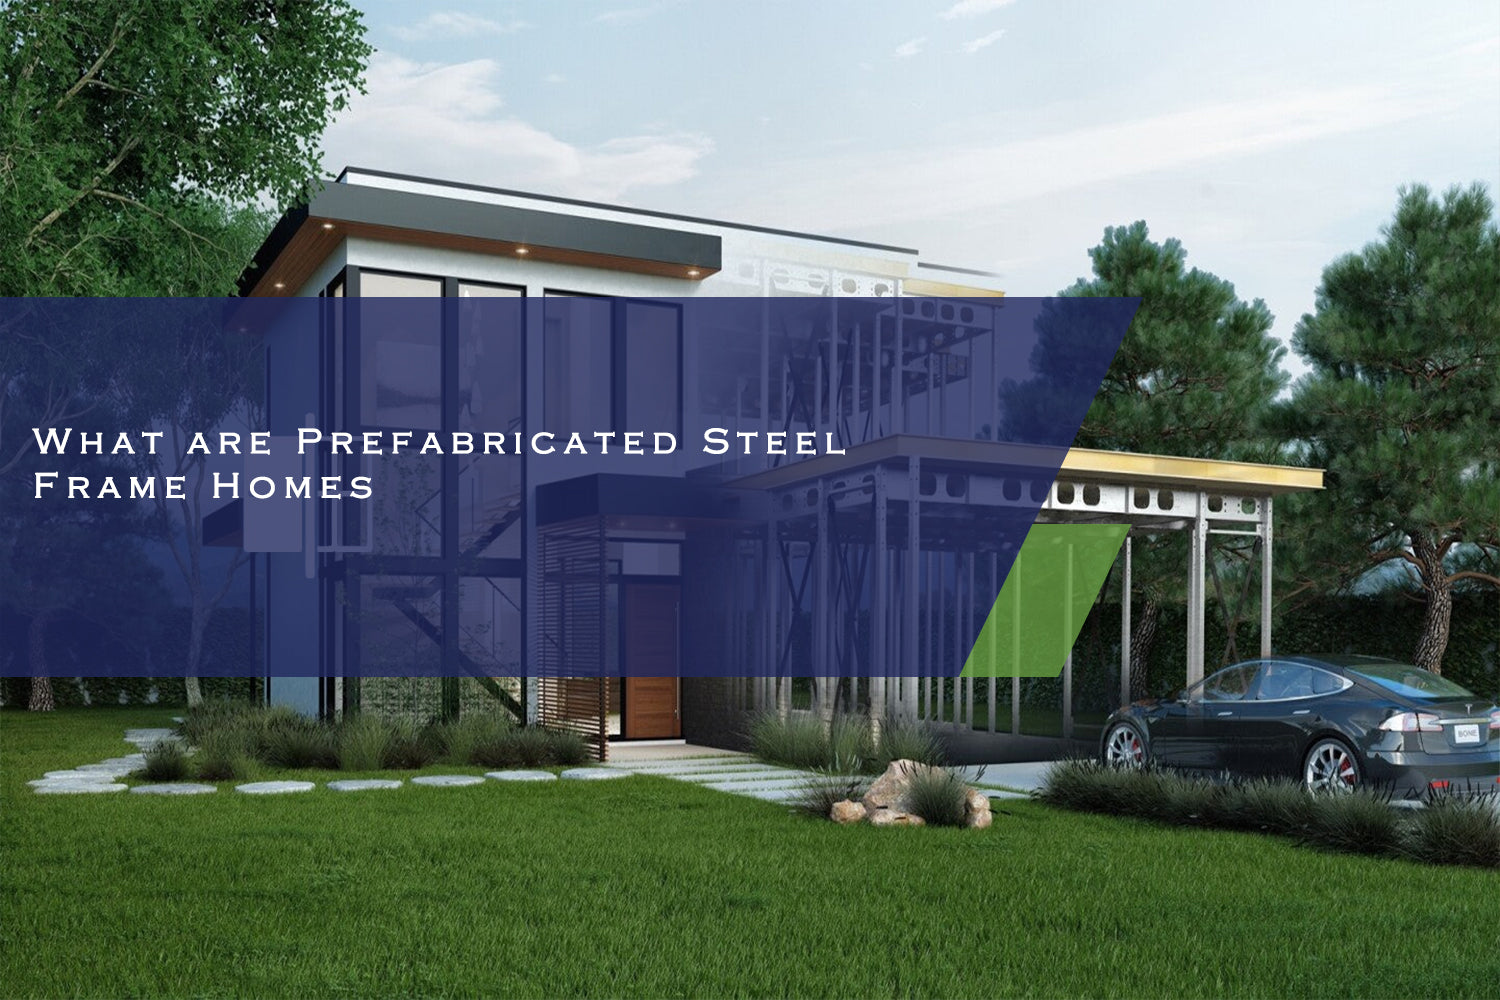 What are Prefabricated Steel Frame Homes?